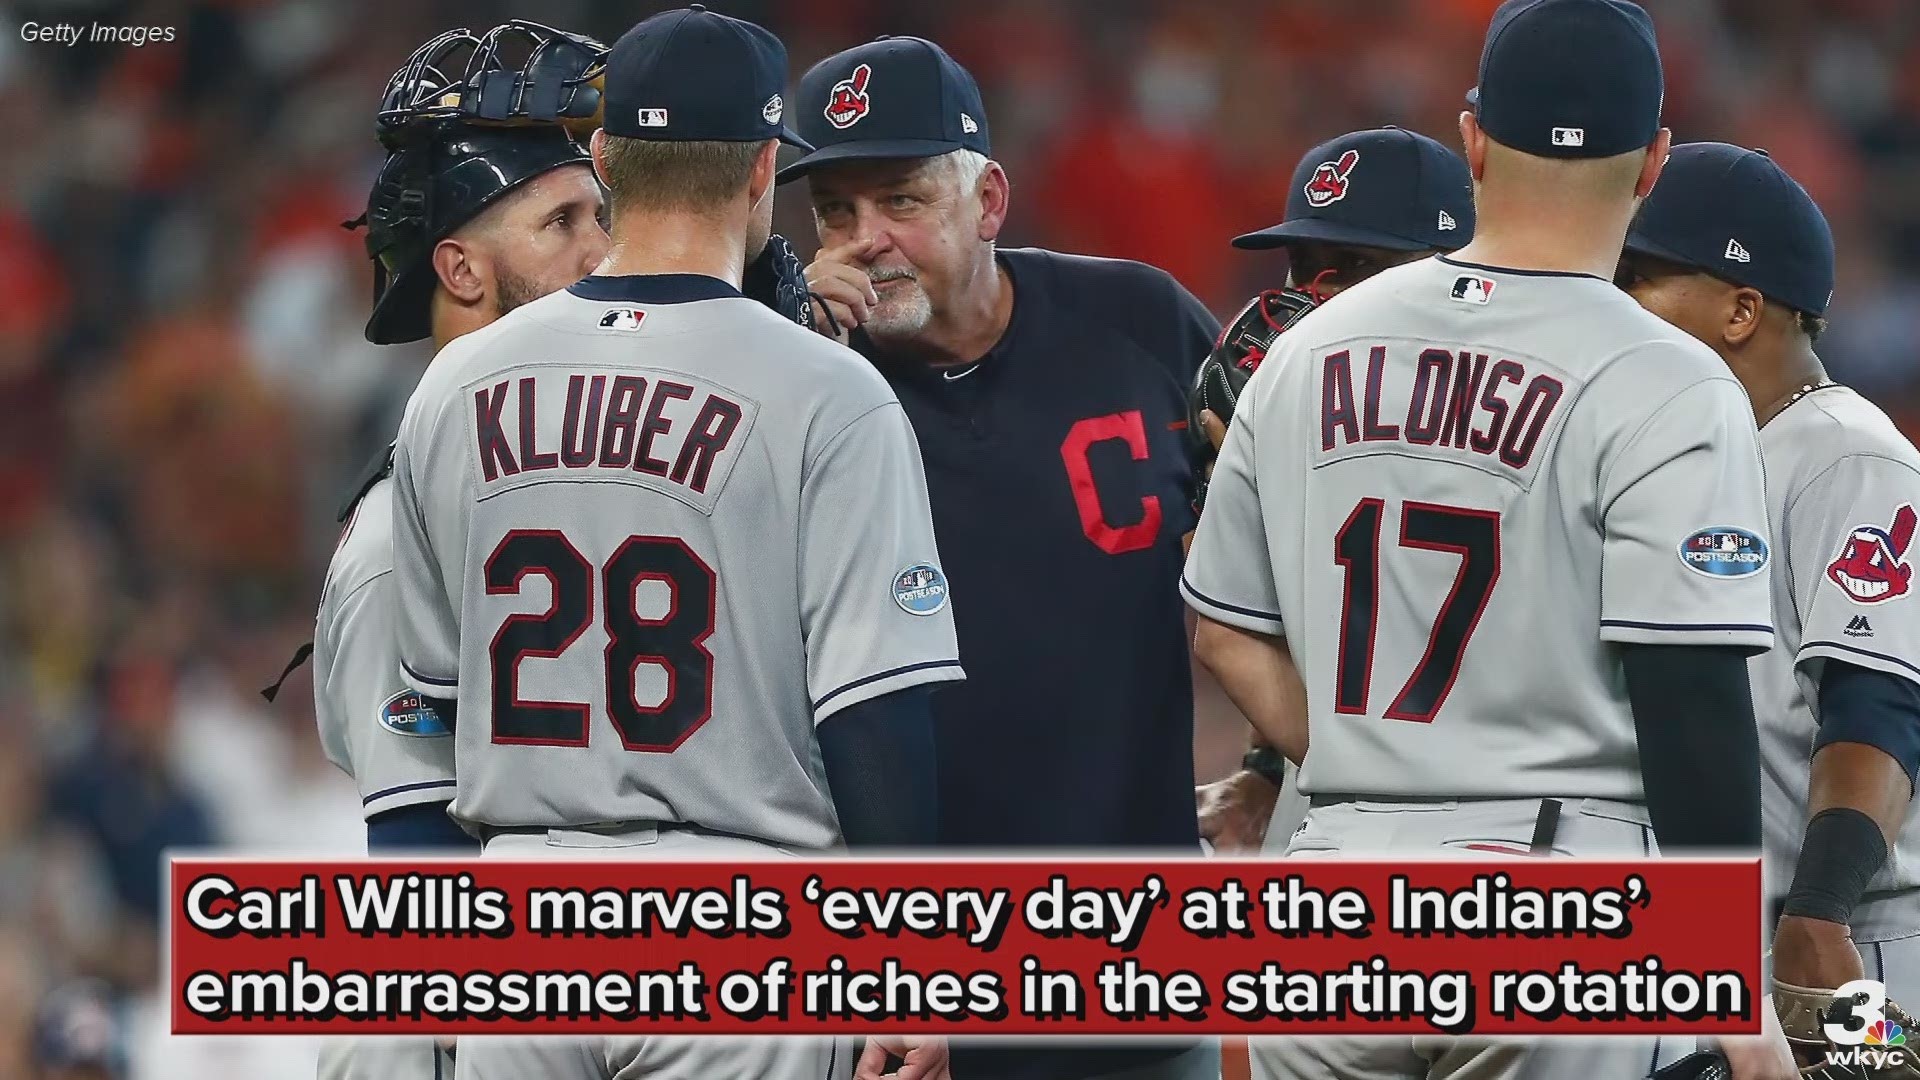 Pitching coach Carl Willis marvels ‘every day’ at the Cleveland Indians’ embarrassment of riches in the starting rotation.